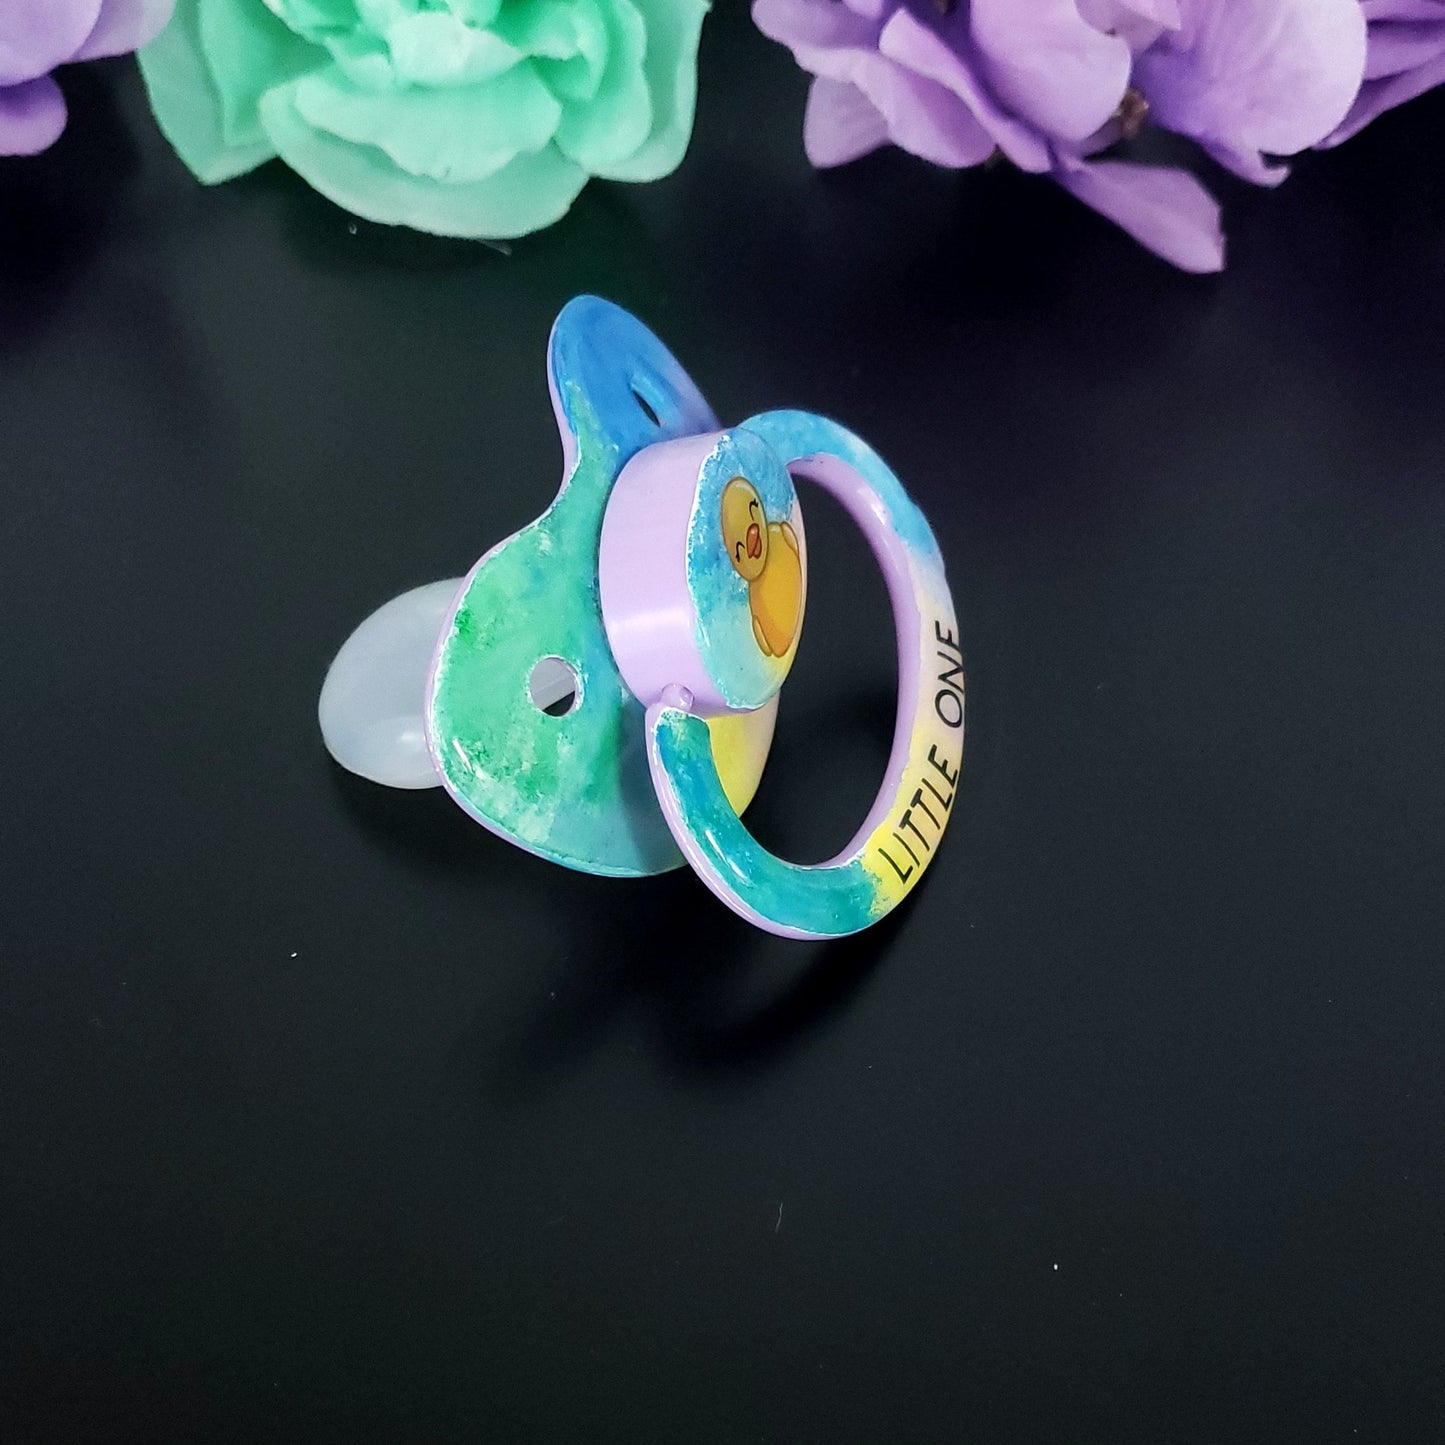 Hand painted Duck Adult Pacifier